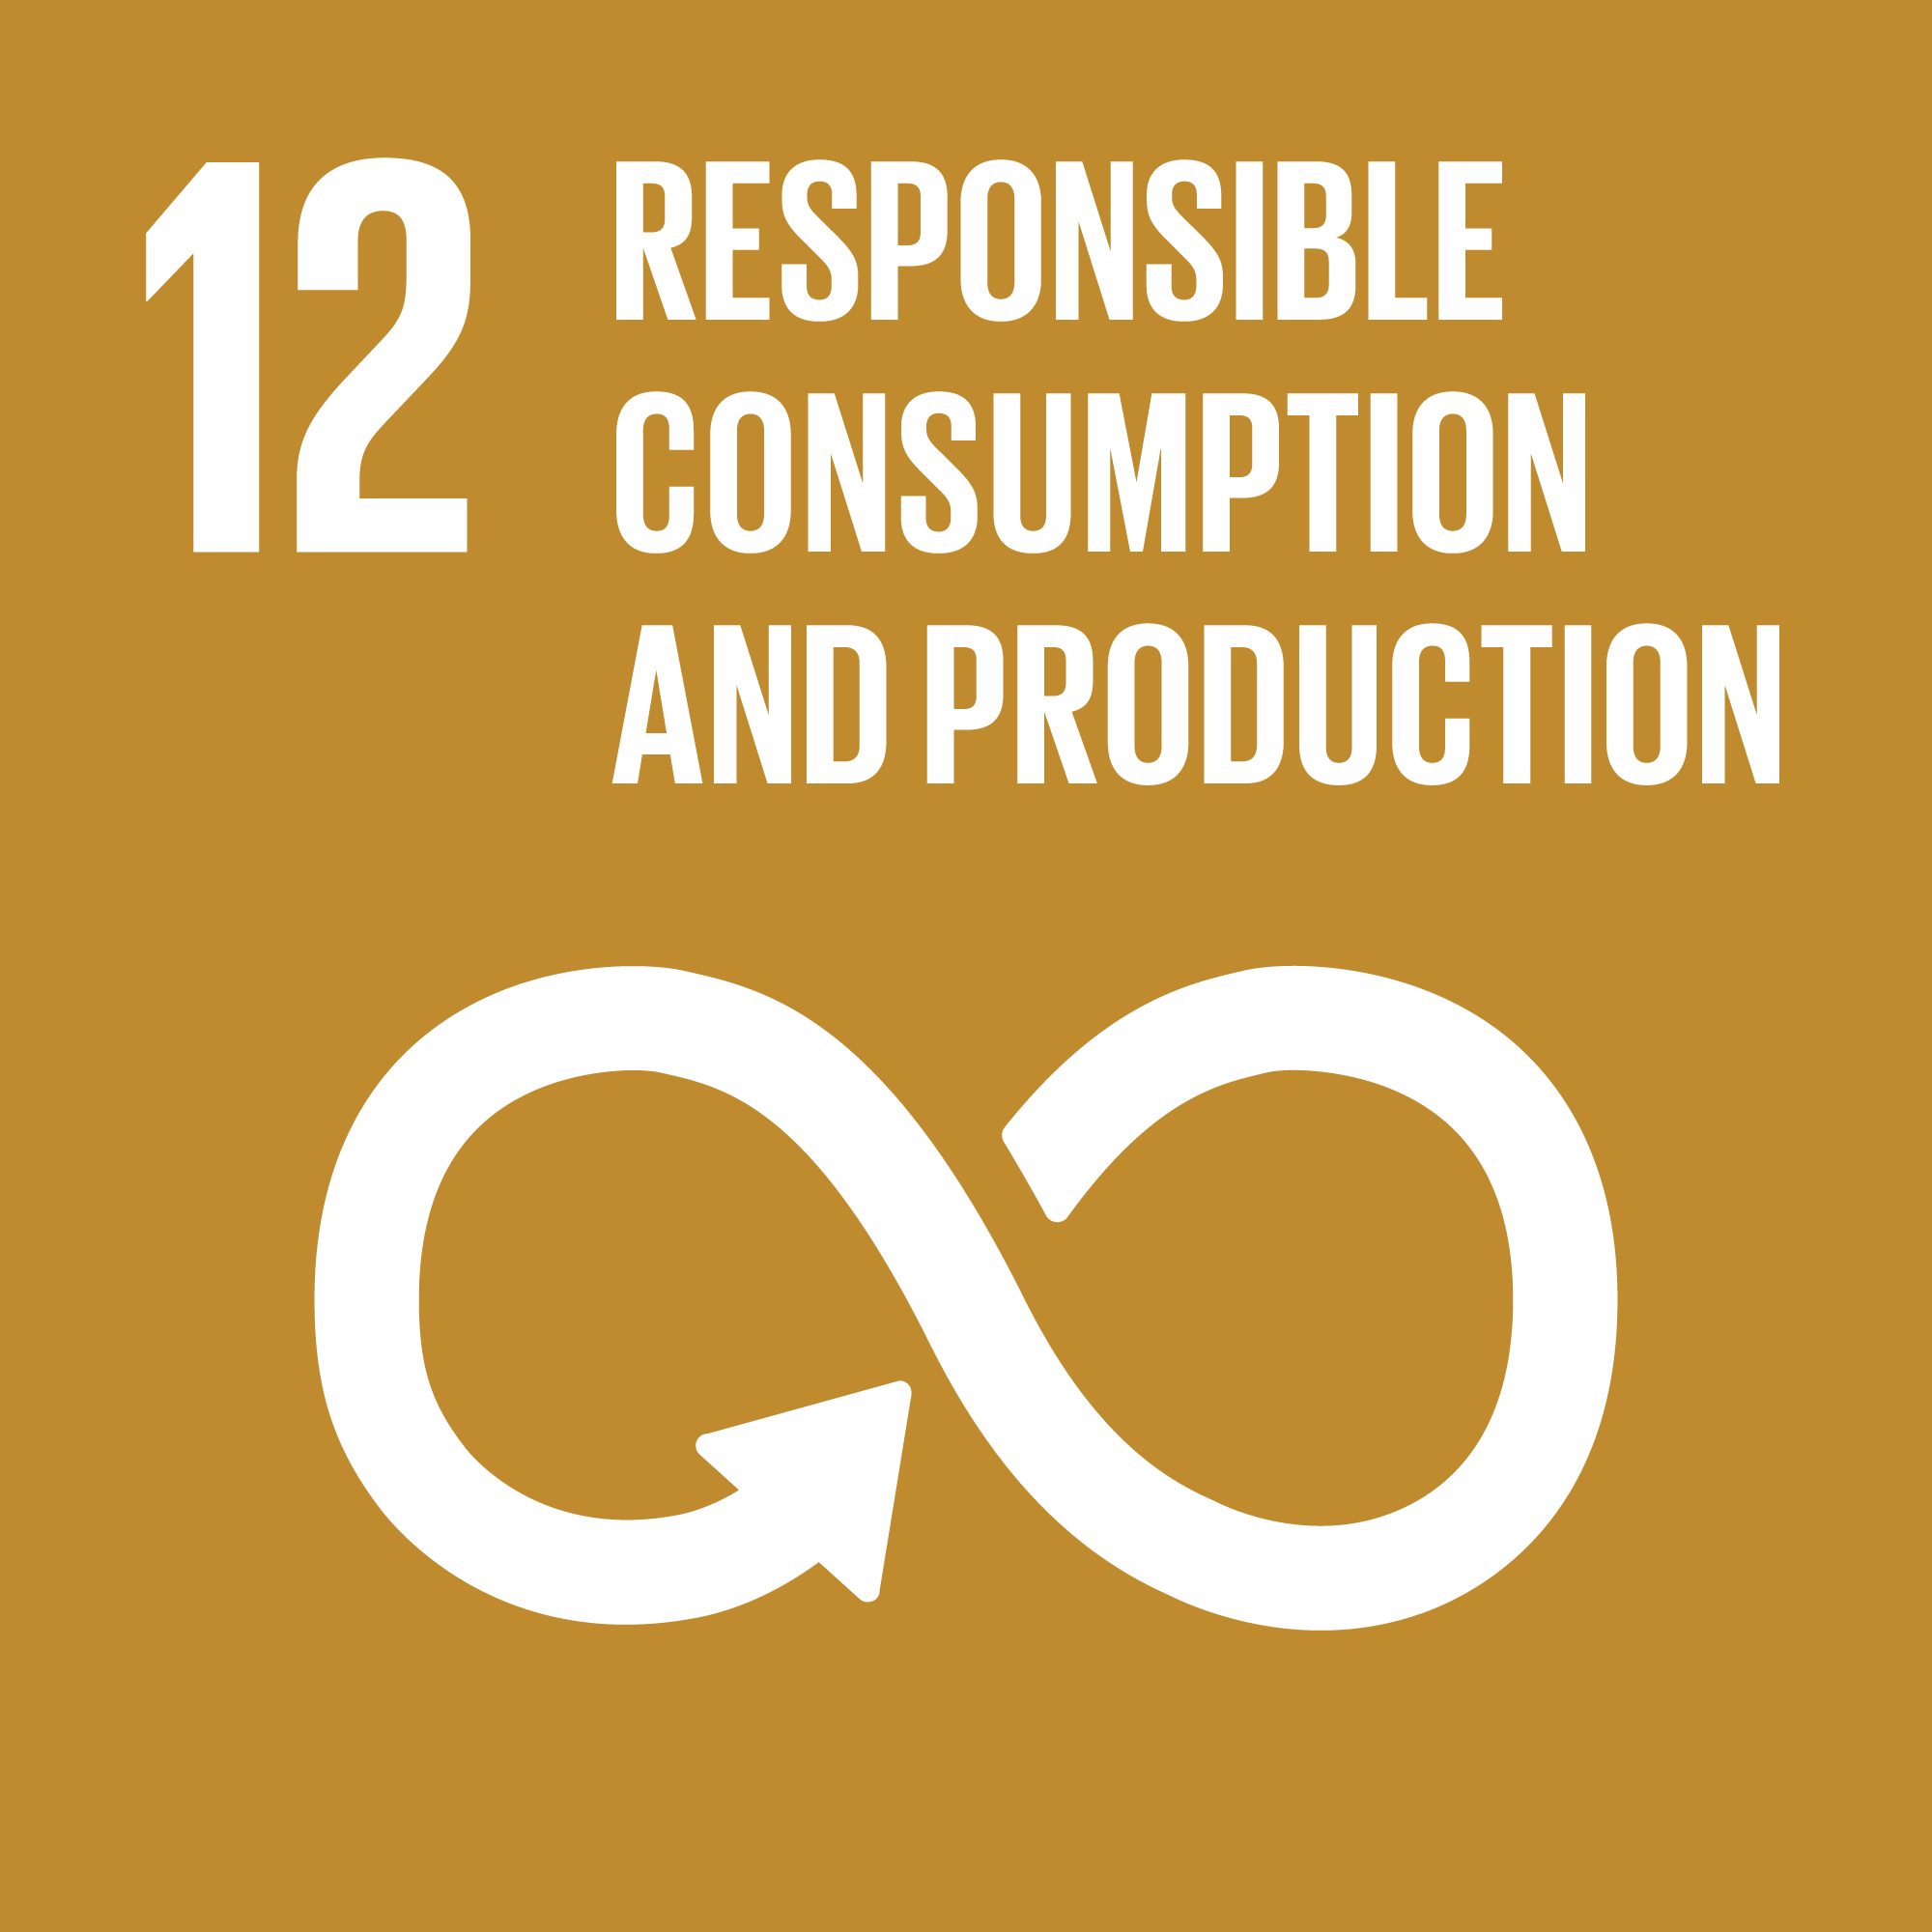 Goal 12: Responsible Consumption and Production - Ensure sustainable consumption and production patterns 